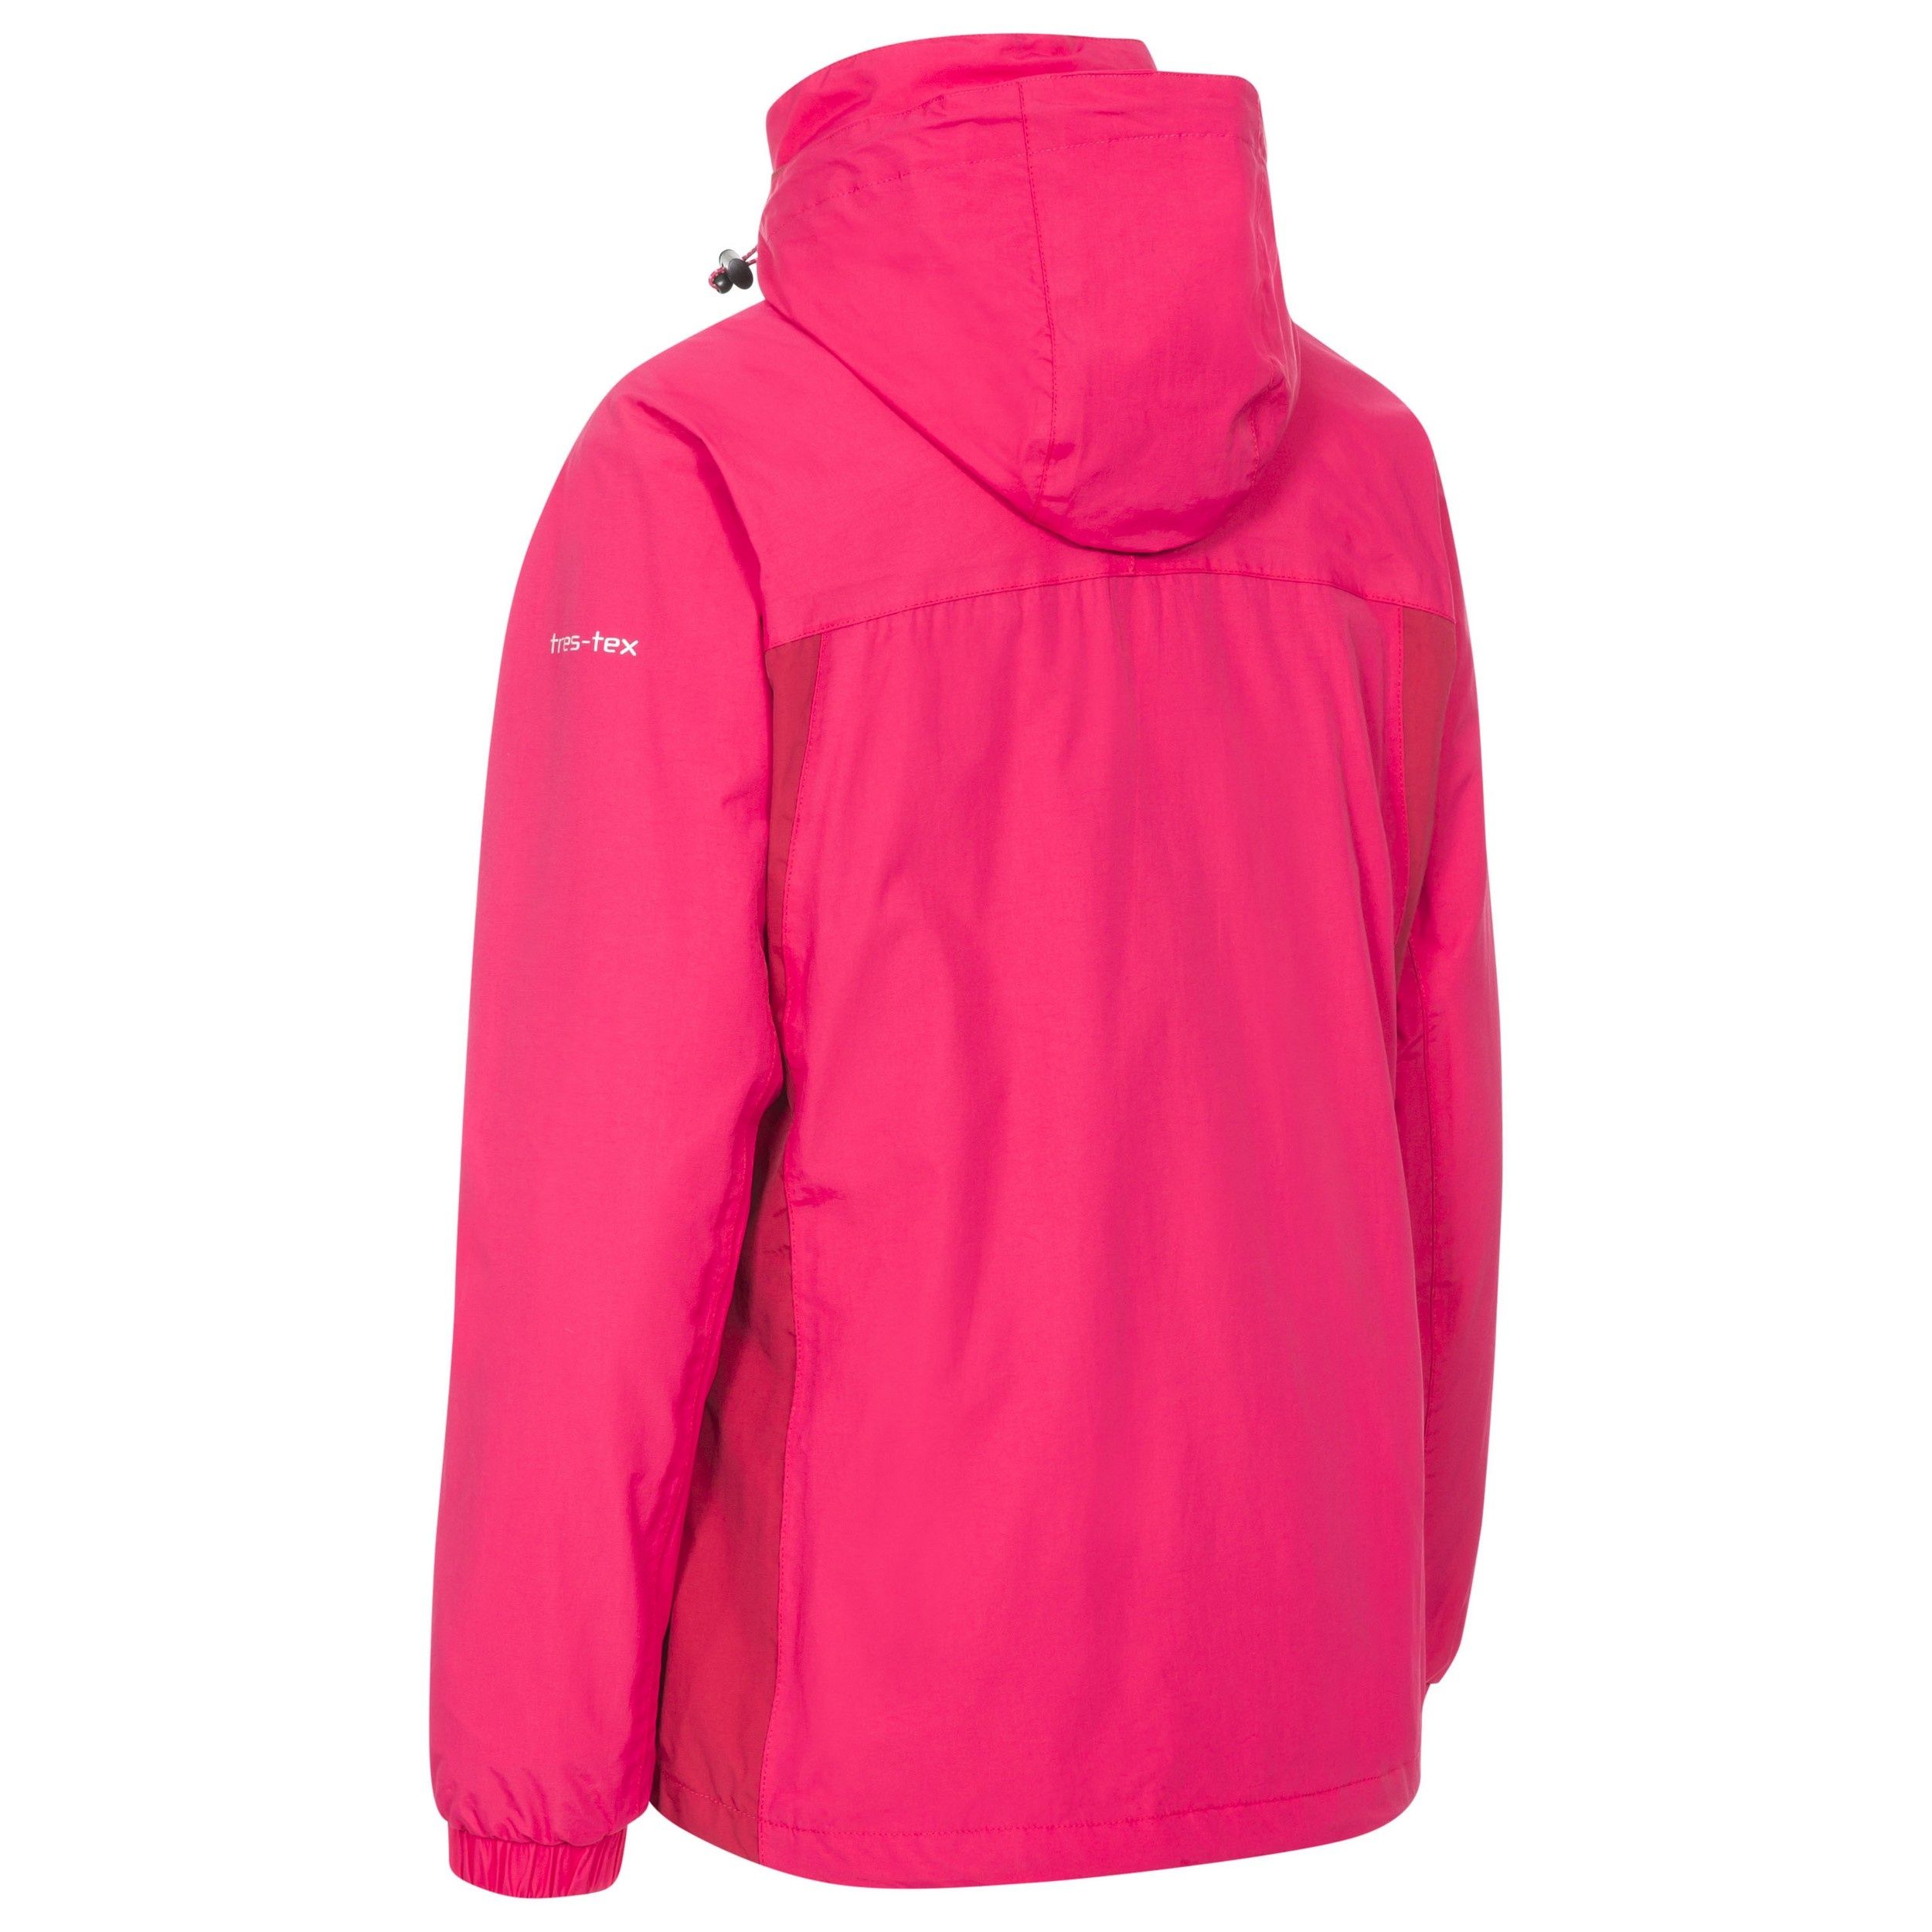 Shell: 100% Polyamide Taslan, PU coating, Lining: 100% Polyester, Inner fleece: 100% Polyester. Mesh lined with detachable inner fleece jacket with waterproof rating up to 5000mm and breathability up to 5000mvp. Adjustable cuffs. Adjustable zip off hood. Chin guard. Trespass Womens Chest Sizing (approx): XS/8 - 32in/81cm, S/10 - 34in/86cm, M/12 - 36in/91.4cm, L/14 - 38in/96.5cm, XL/16 - 40in/101.5cm, XXL/18 - 42in/106.5cm.